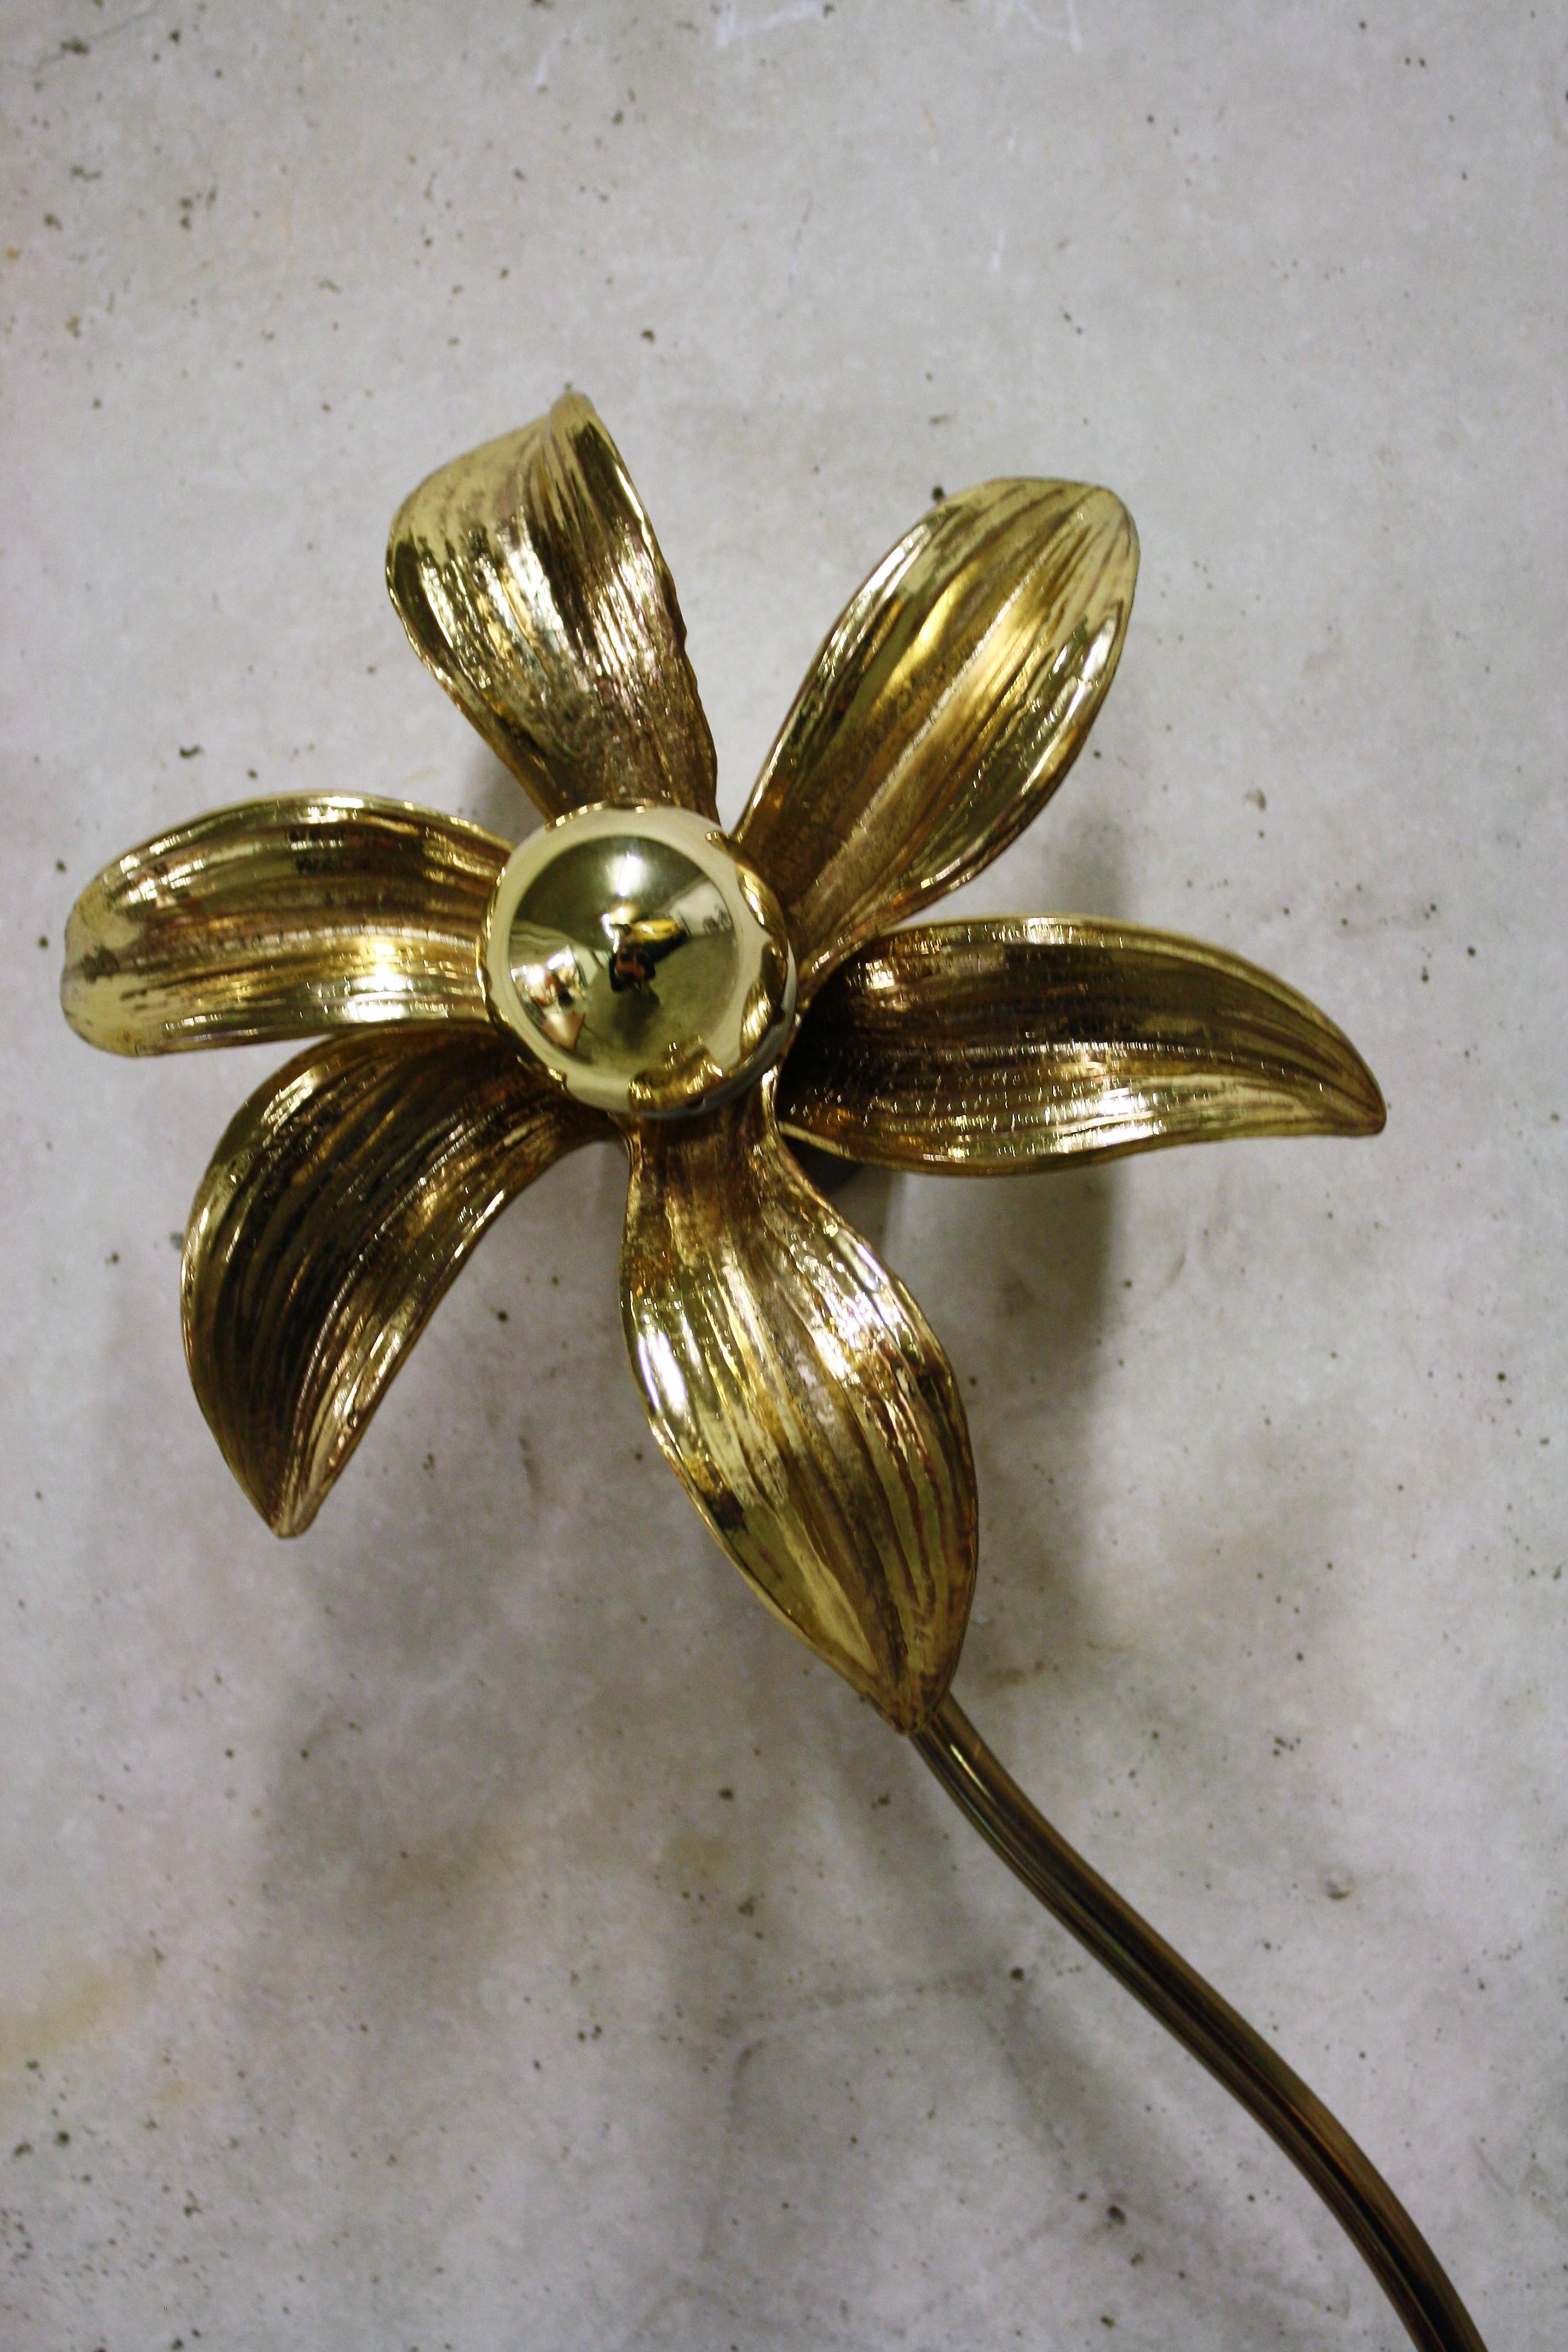 Brass flowers ceiling/wall light in the style of designer Willy Daro manufactured by `Massive Lighting`, circa 1970s, Belgian.

Thoroughly cleaned respecting the vintage patina

Each individual flower is made up of six quality cast naturalistic